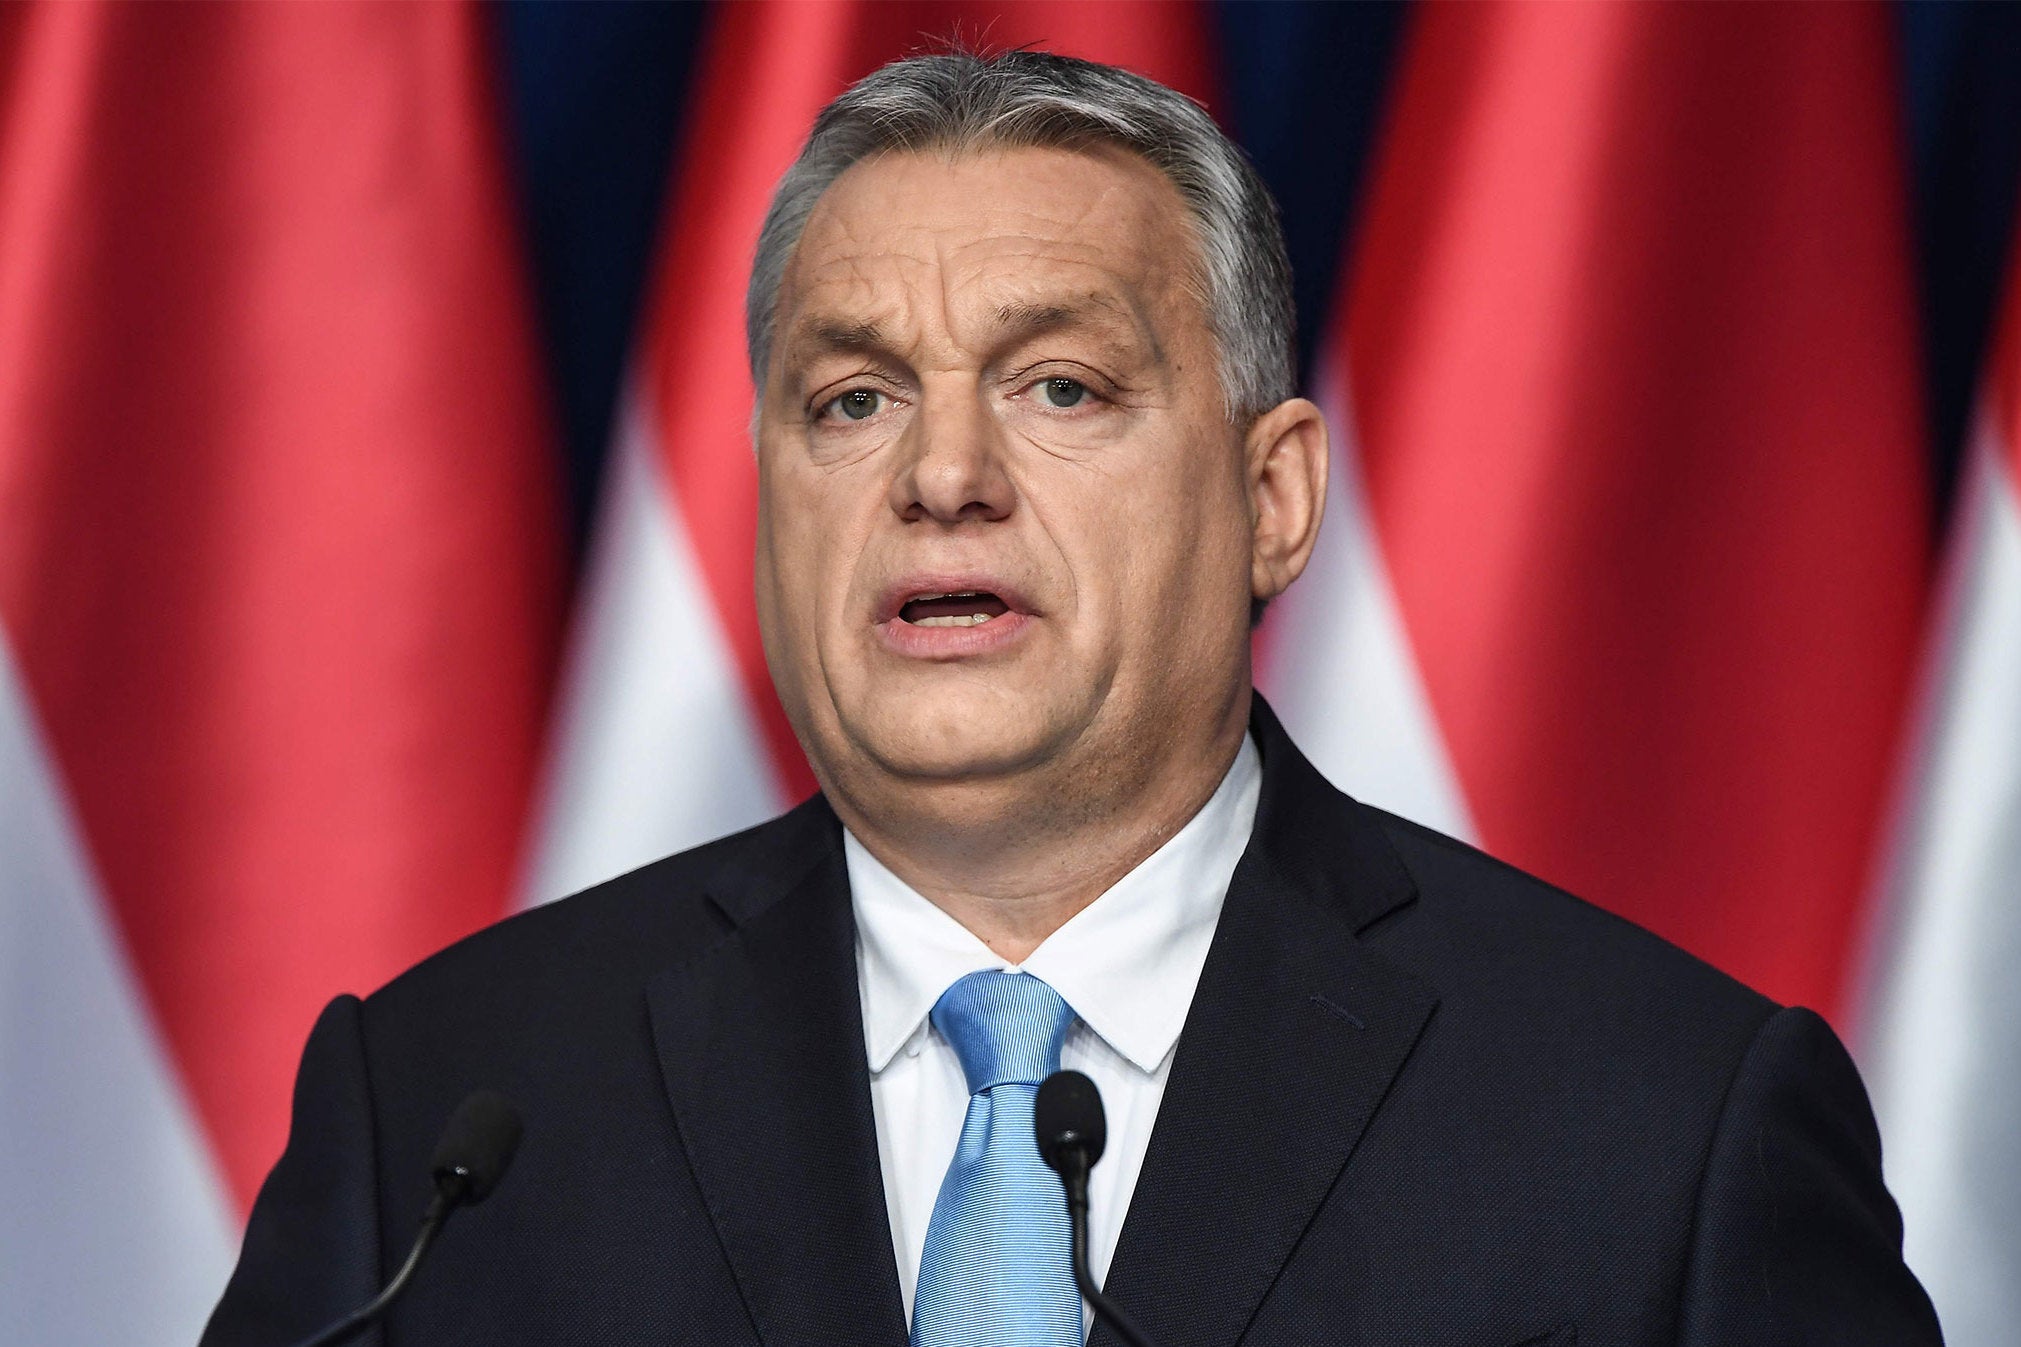 Viktor Orban has made a name for himself as an anti-immigrant populist